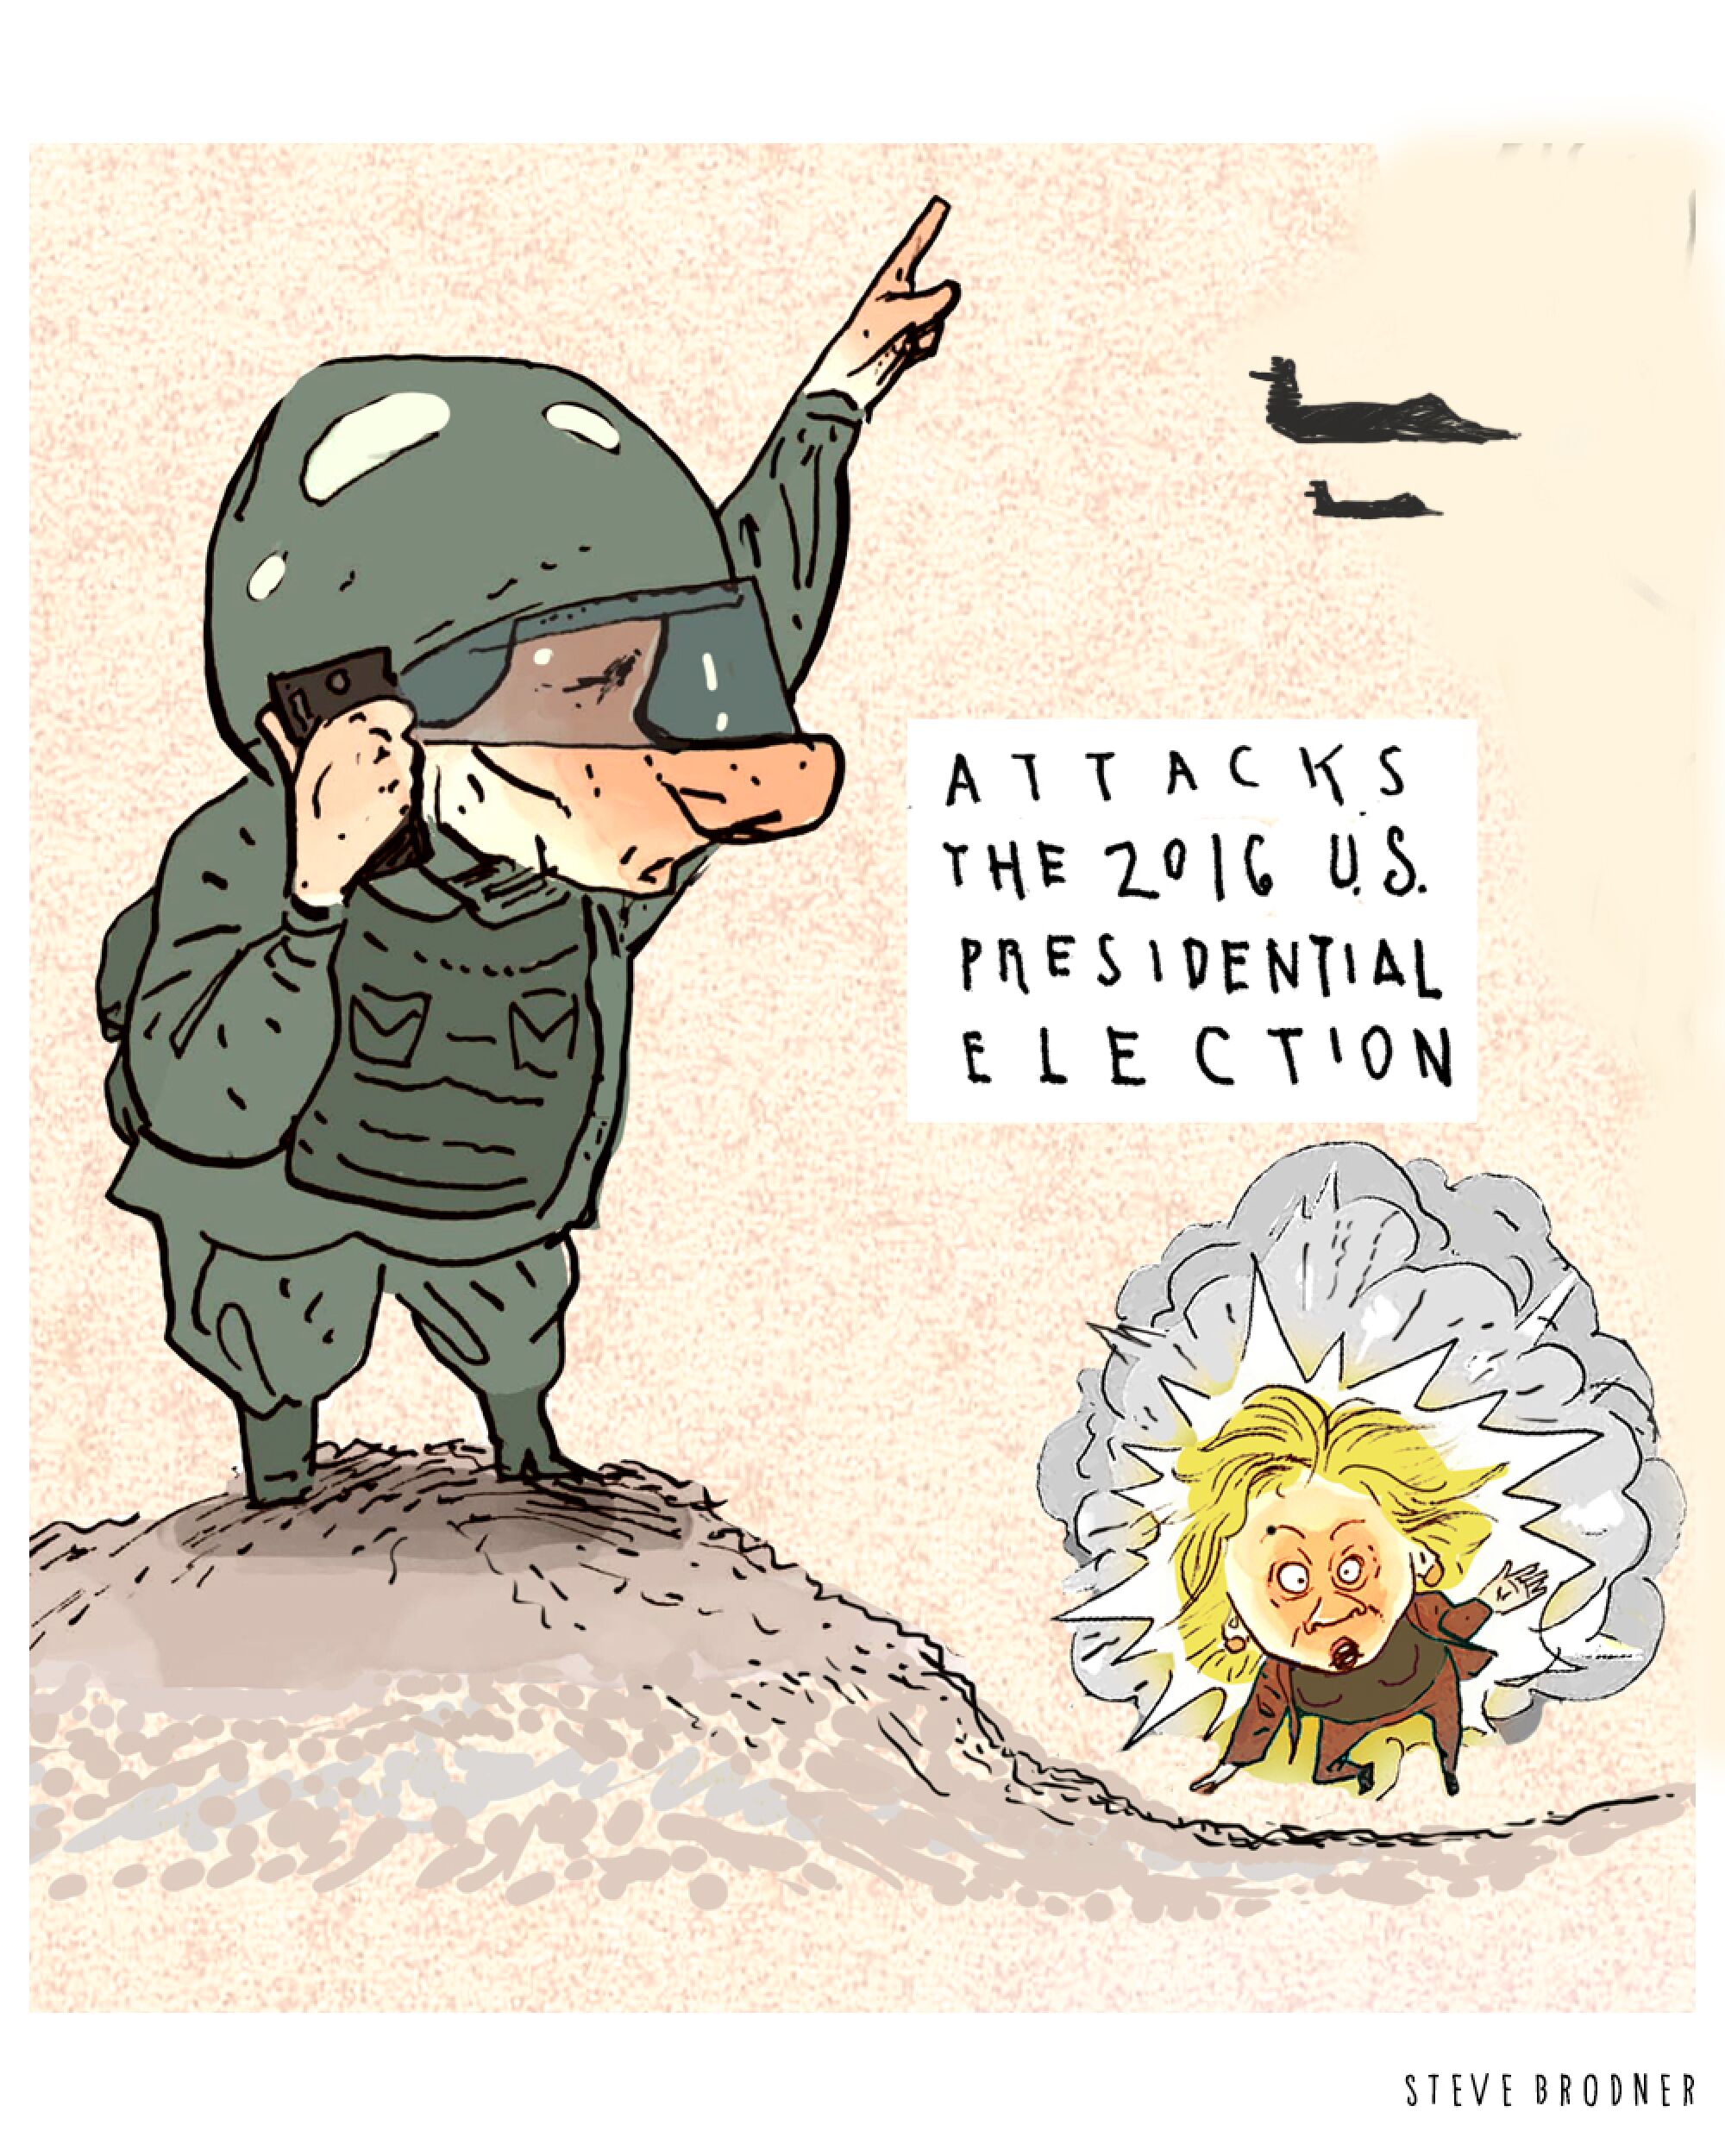 Cartoon of Putin in military gear and Hillary Clinton being bombed. Text: "Attacks the 2016 US presidential election"